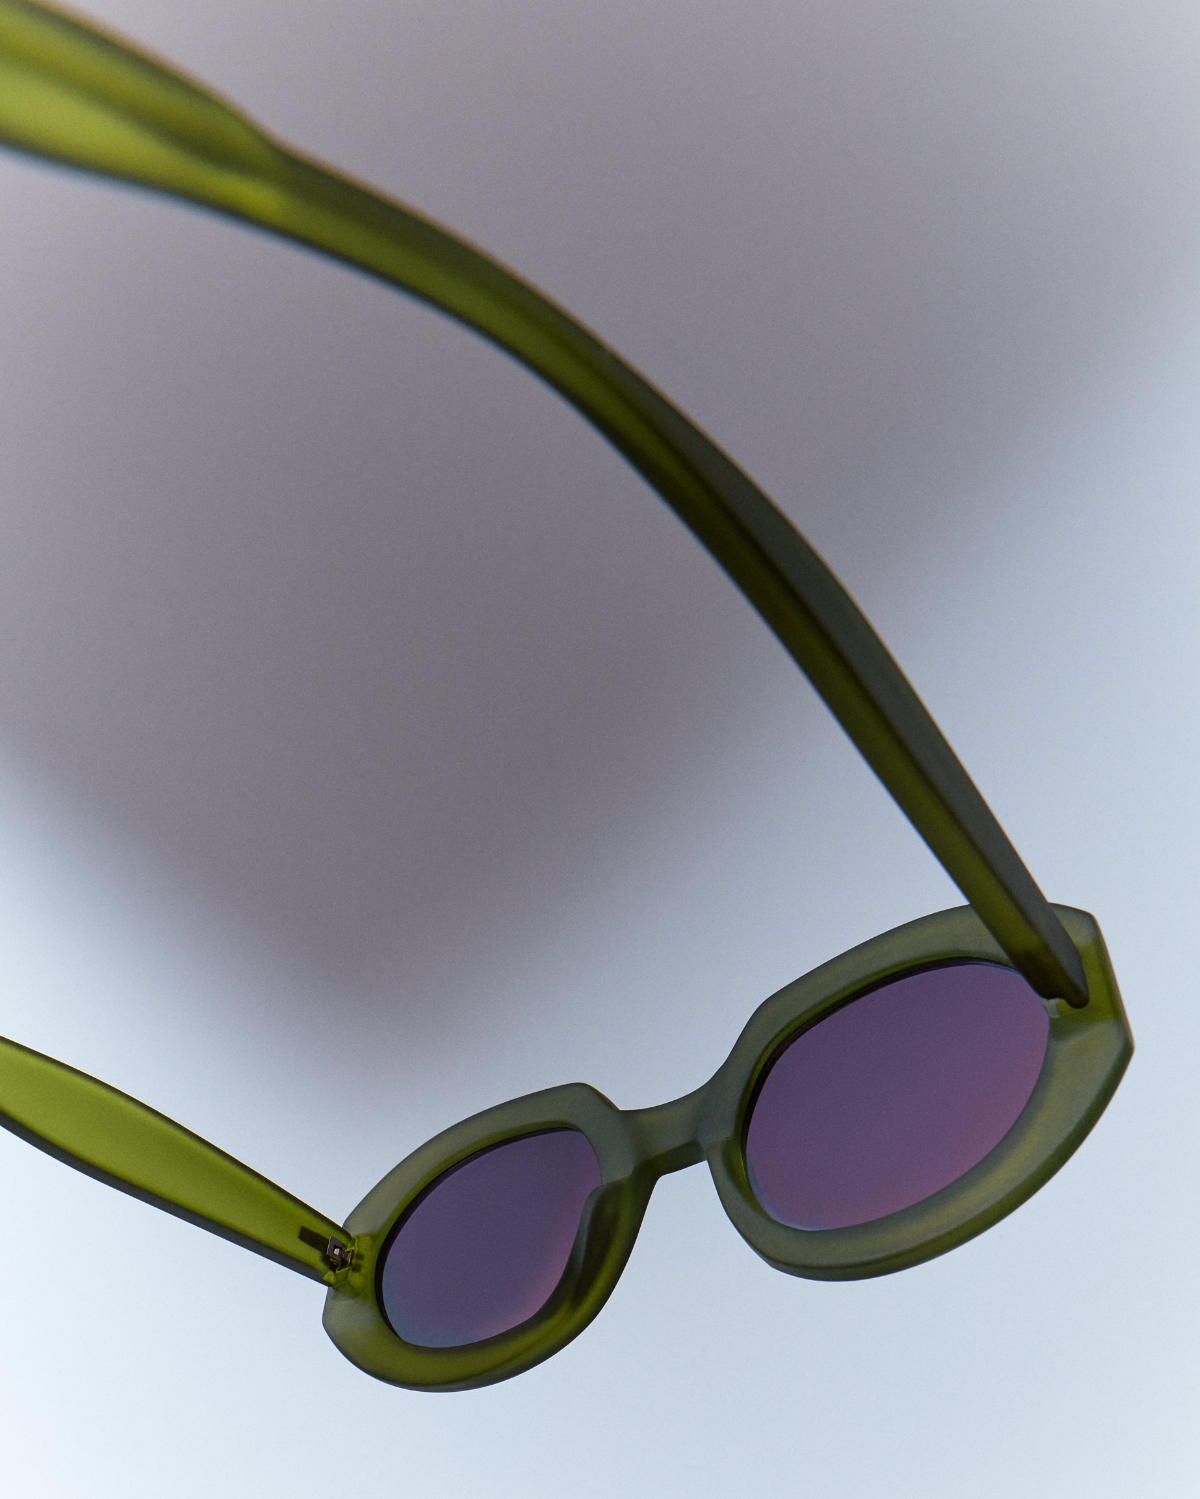 COS Presents Its Vision For SS 2021 And Launches Circular COS X Yuma Labs Sunglasses Collaboration